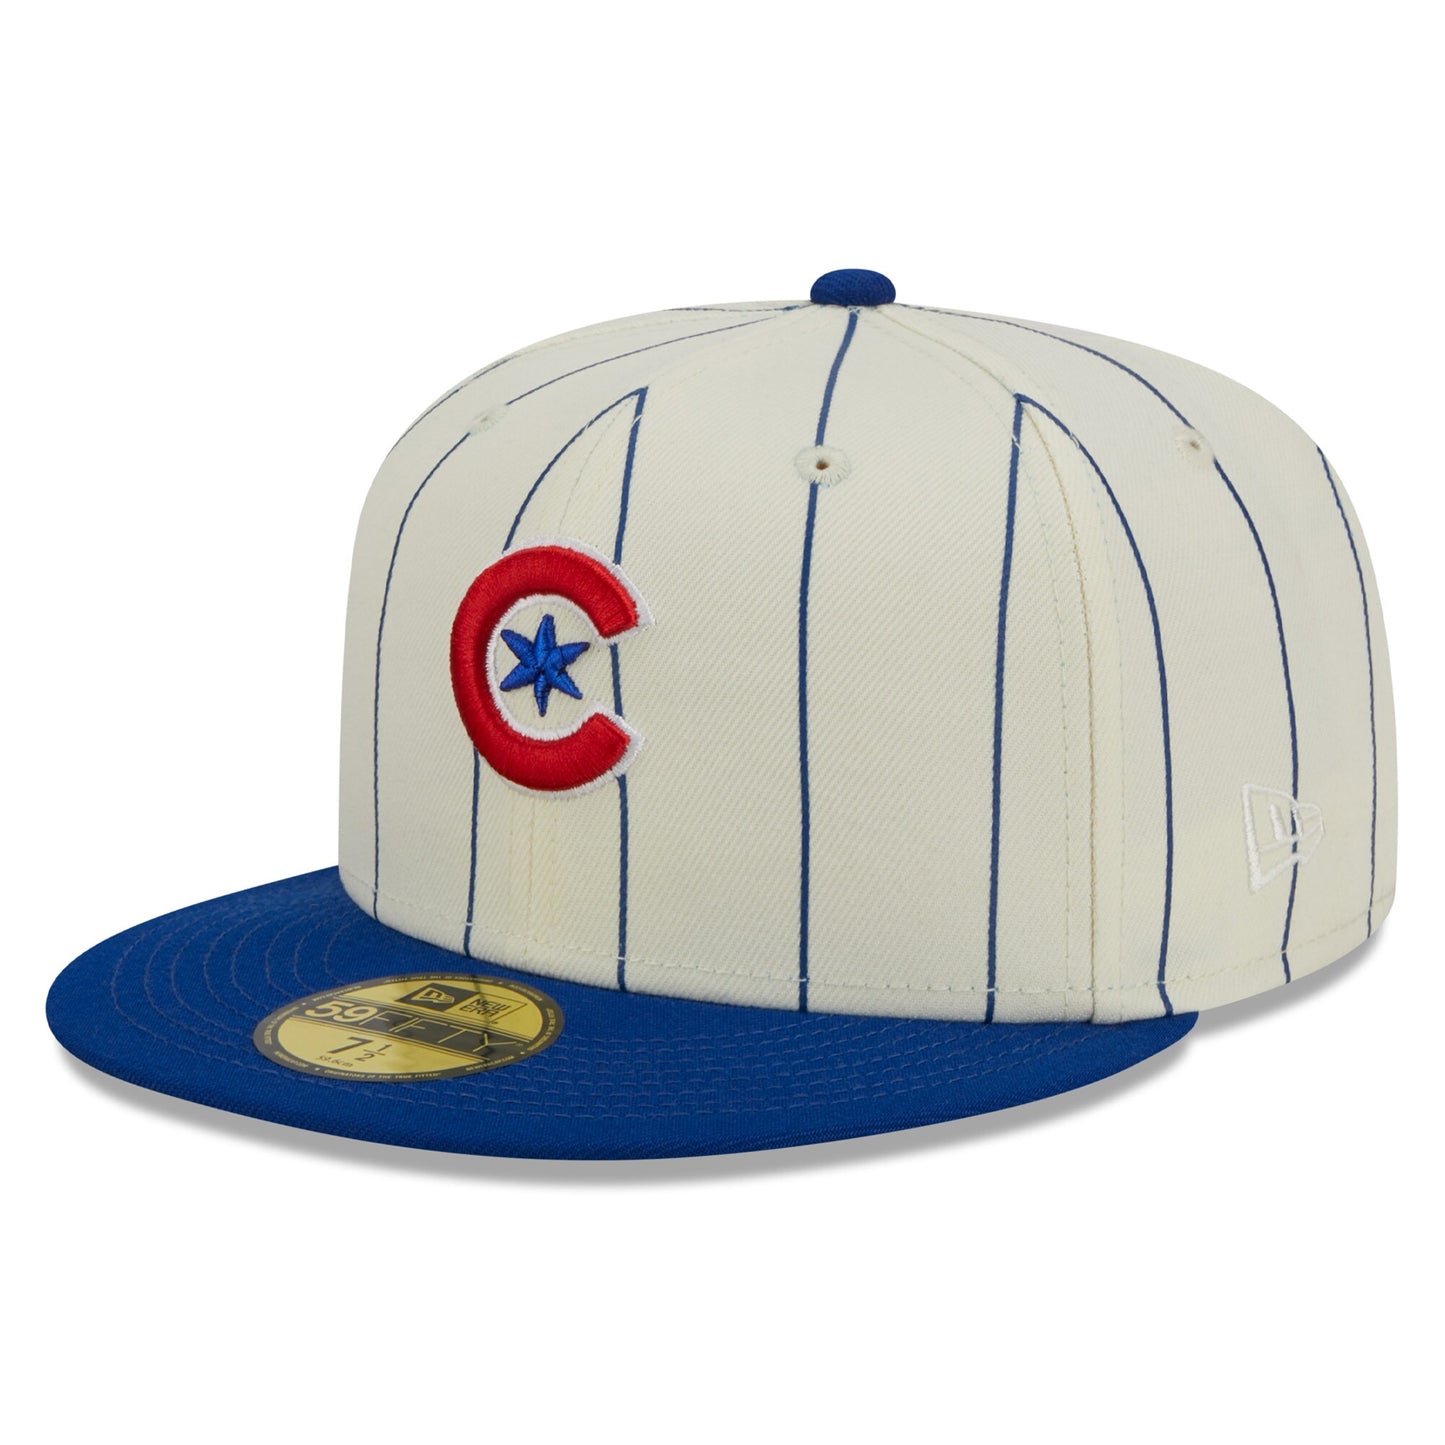 Chicago Cubs New Era Cooperstown Collection Retro City 59FIFTY Fitted Hat - White